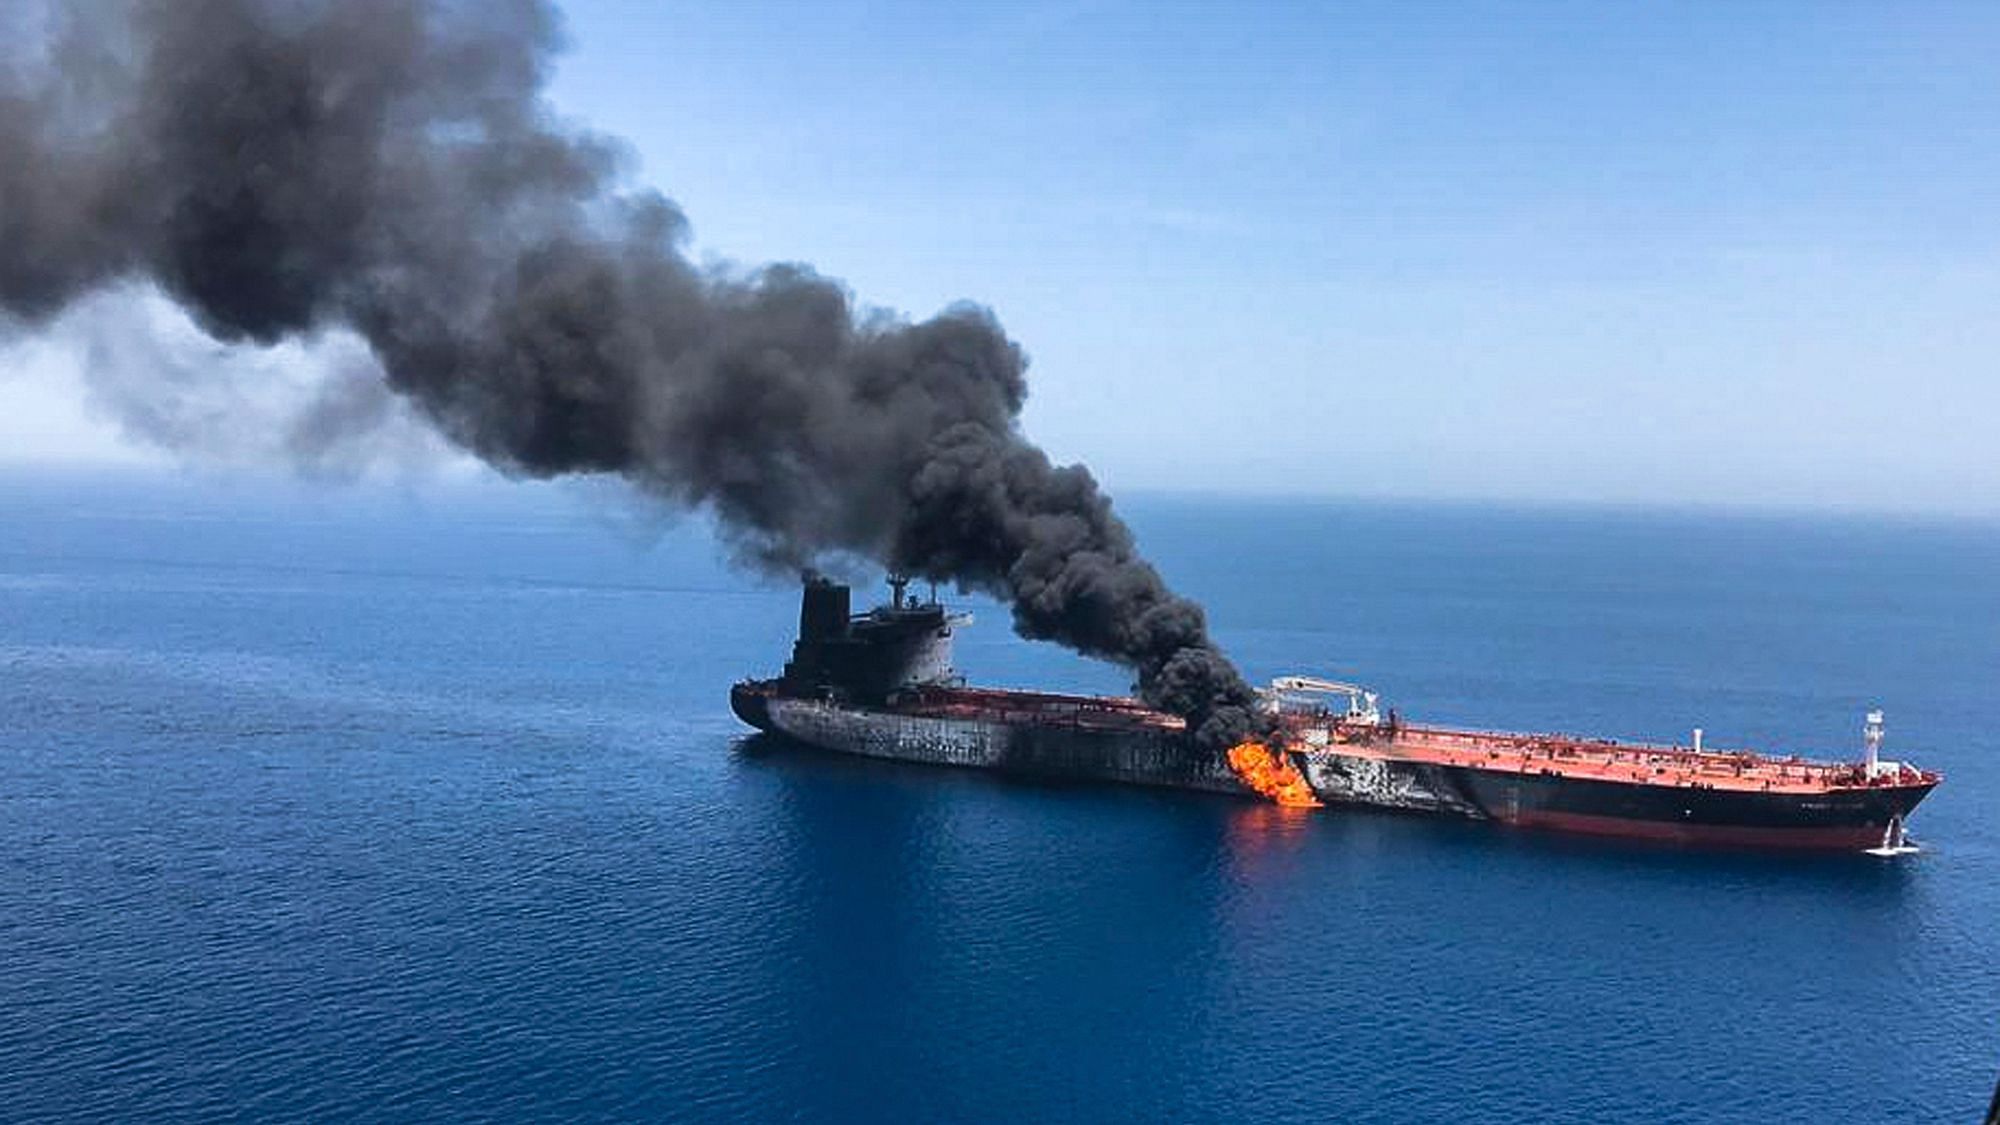 Two oil tankers were attacked in the sea of Oman near the strategic Strait of Hormuz on Thursday, 13 June. 